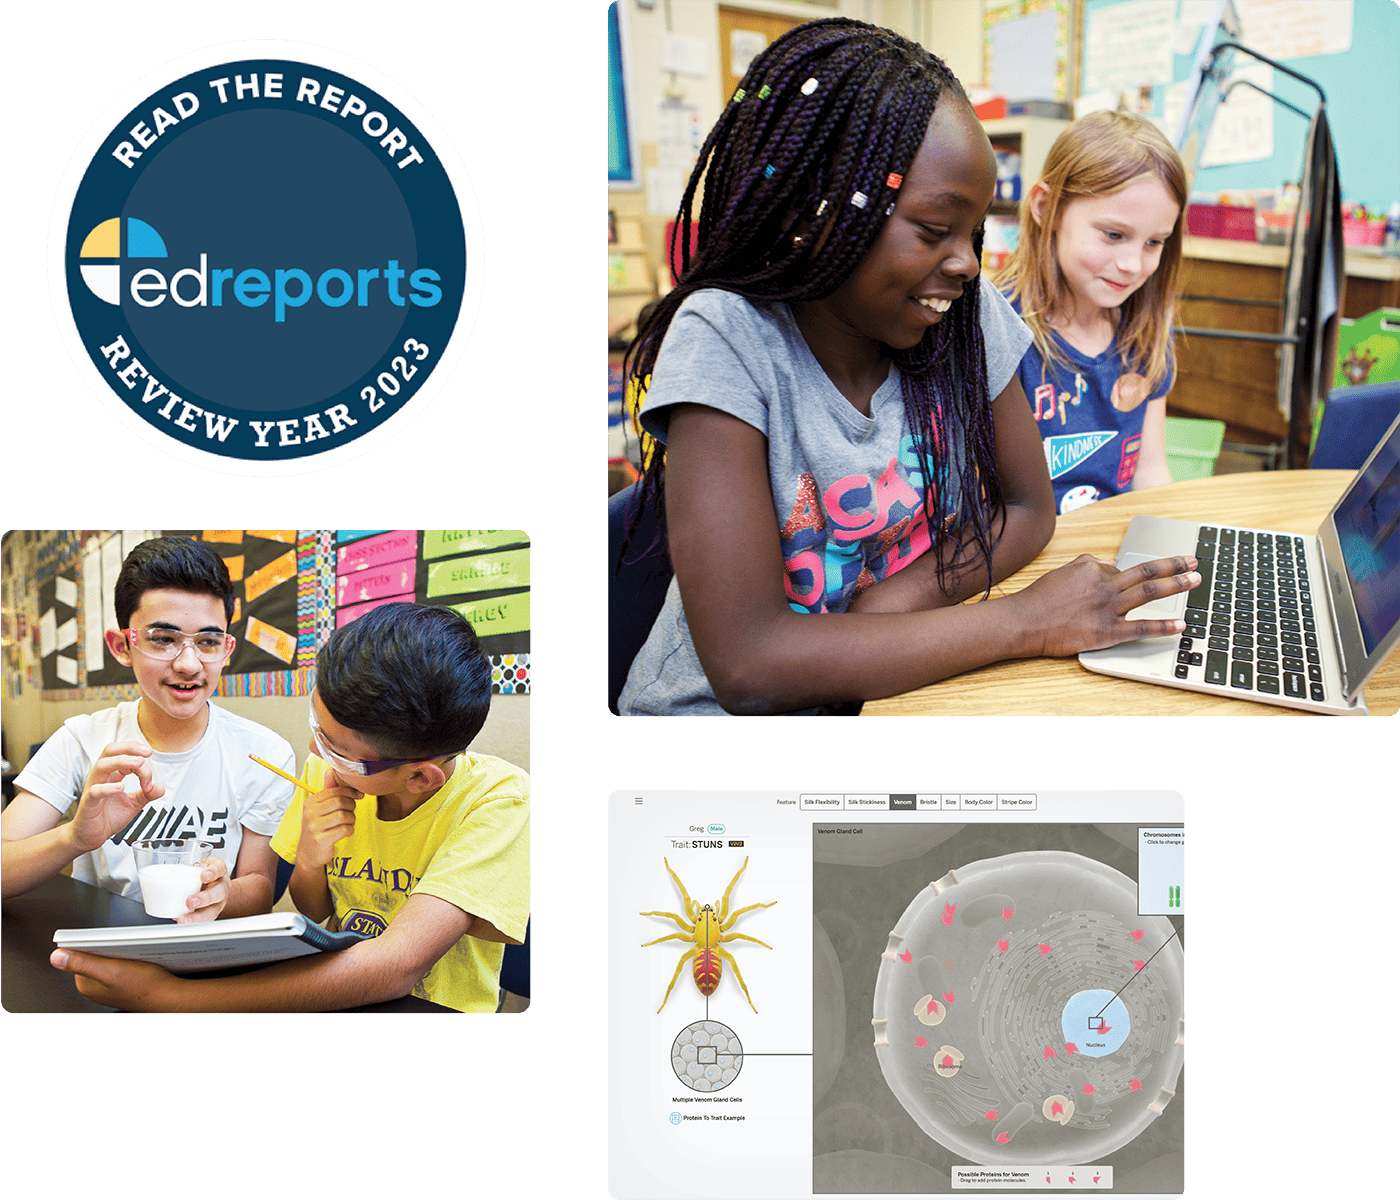 Collage of educational settings: top image of a black girl and caucasian girl using a laptop, middle of edreports logo, and bottom of two boys with a tablet and a biology textbook graphic.